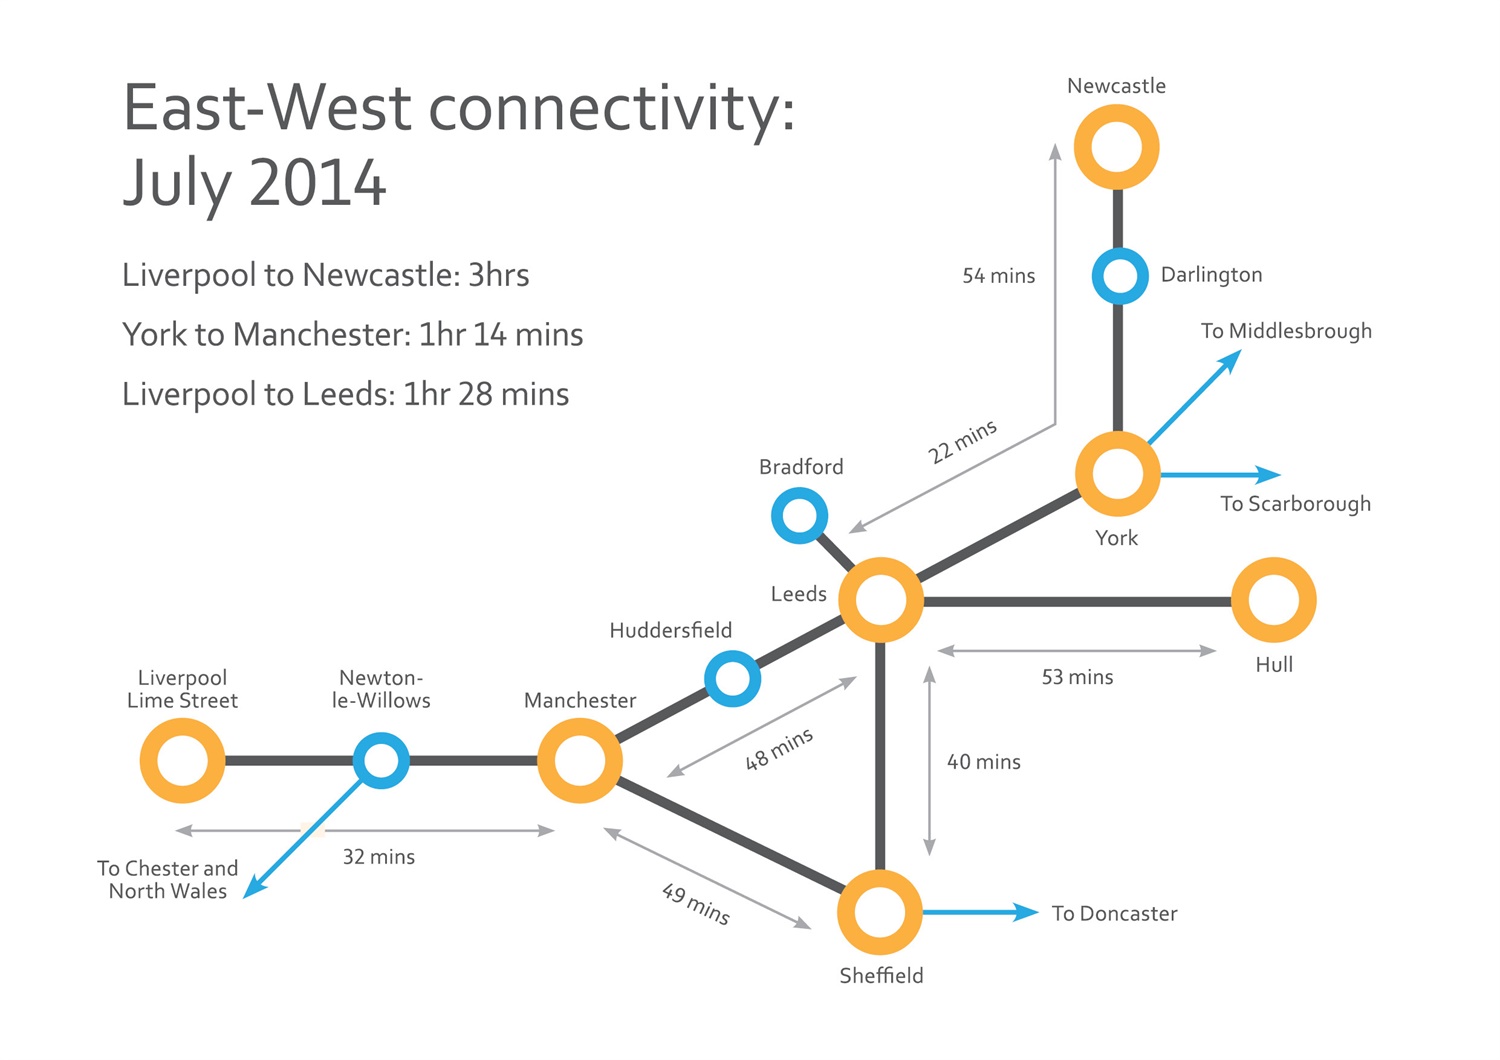 East-West Connectivity July 2014